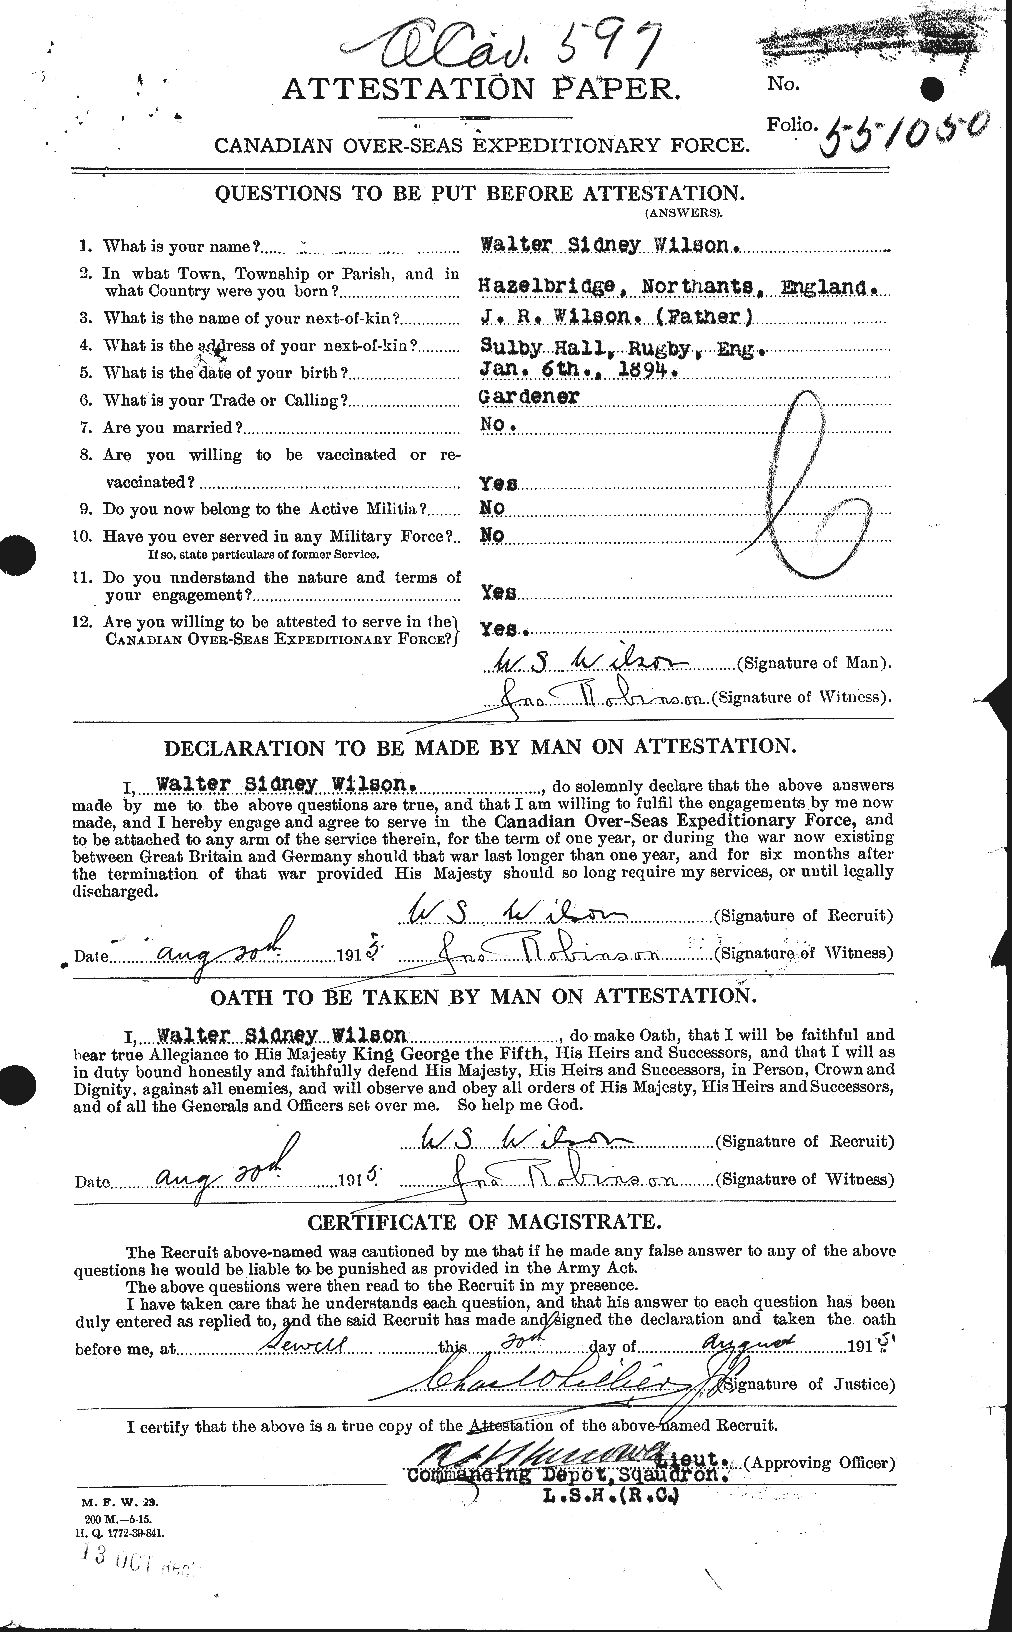 Personnel Records of the First World War - CEF 681764a